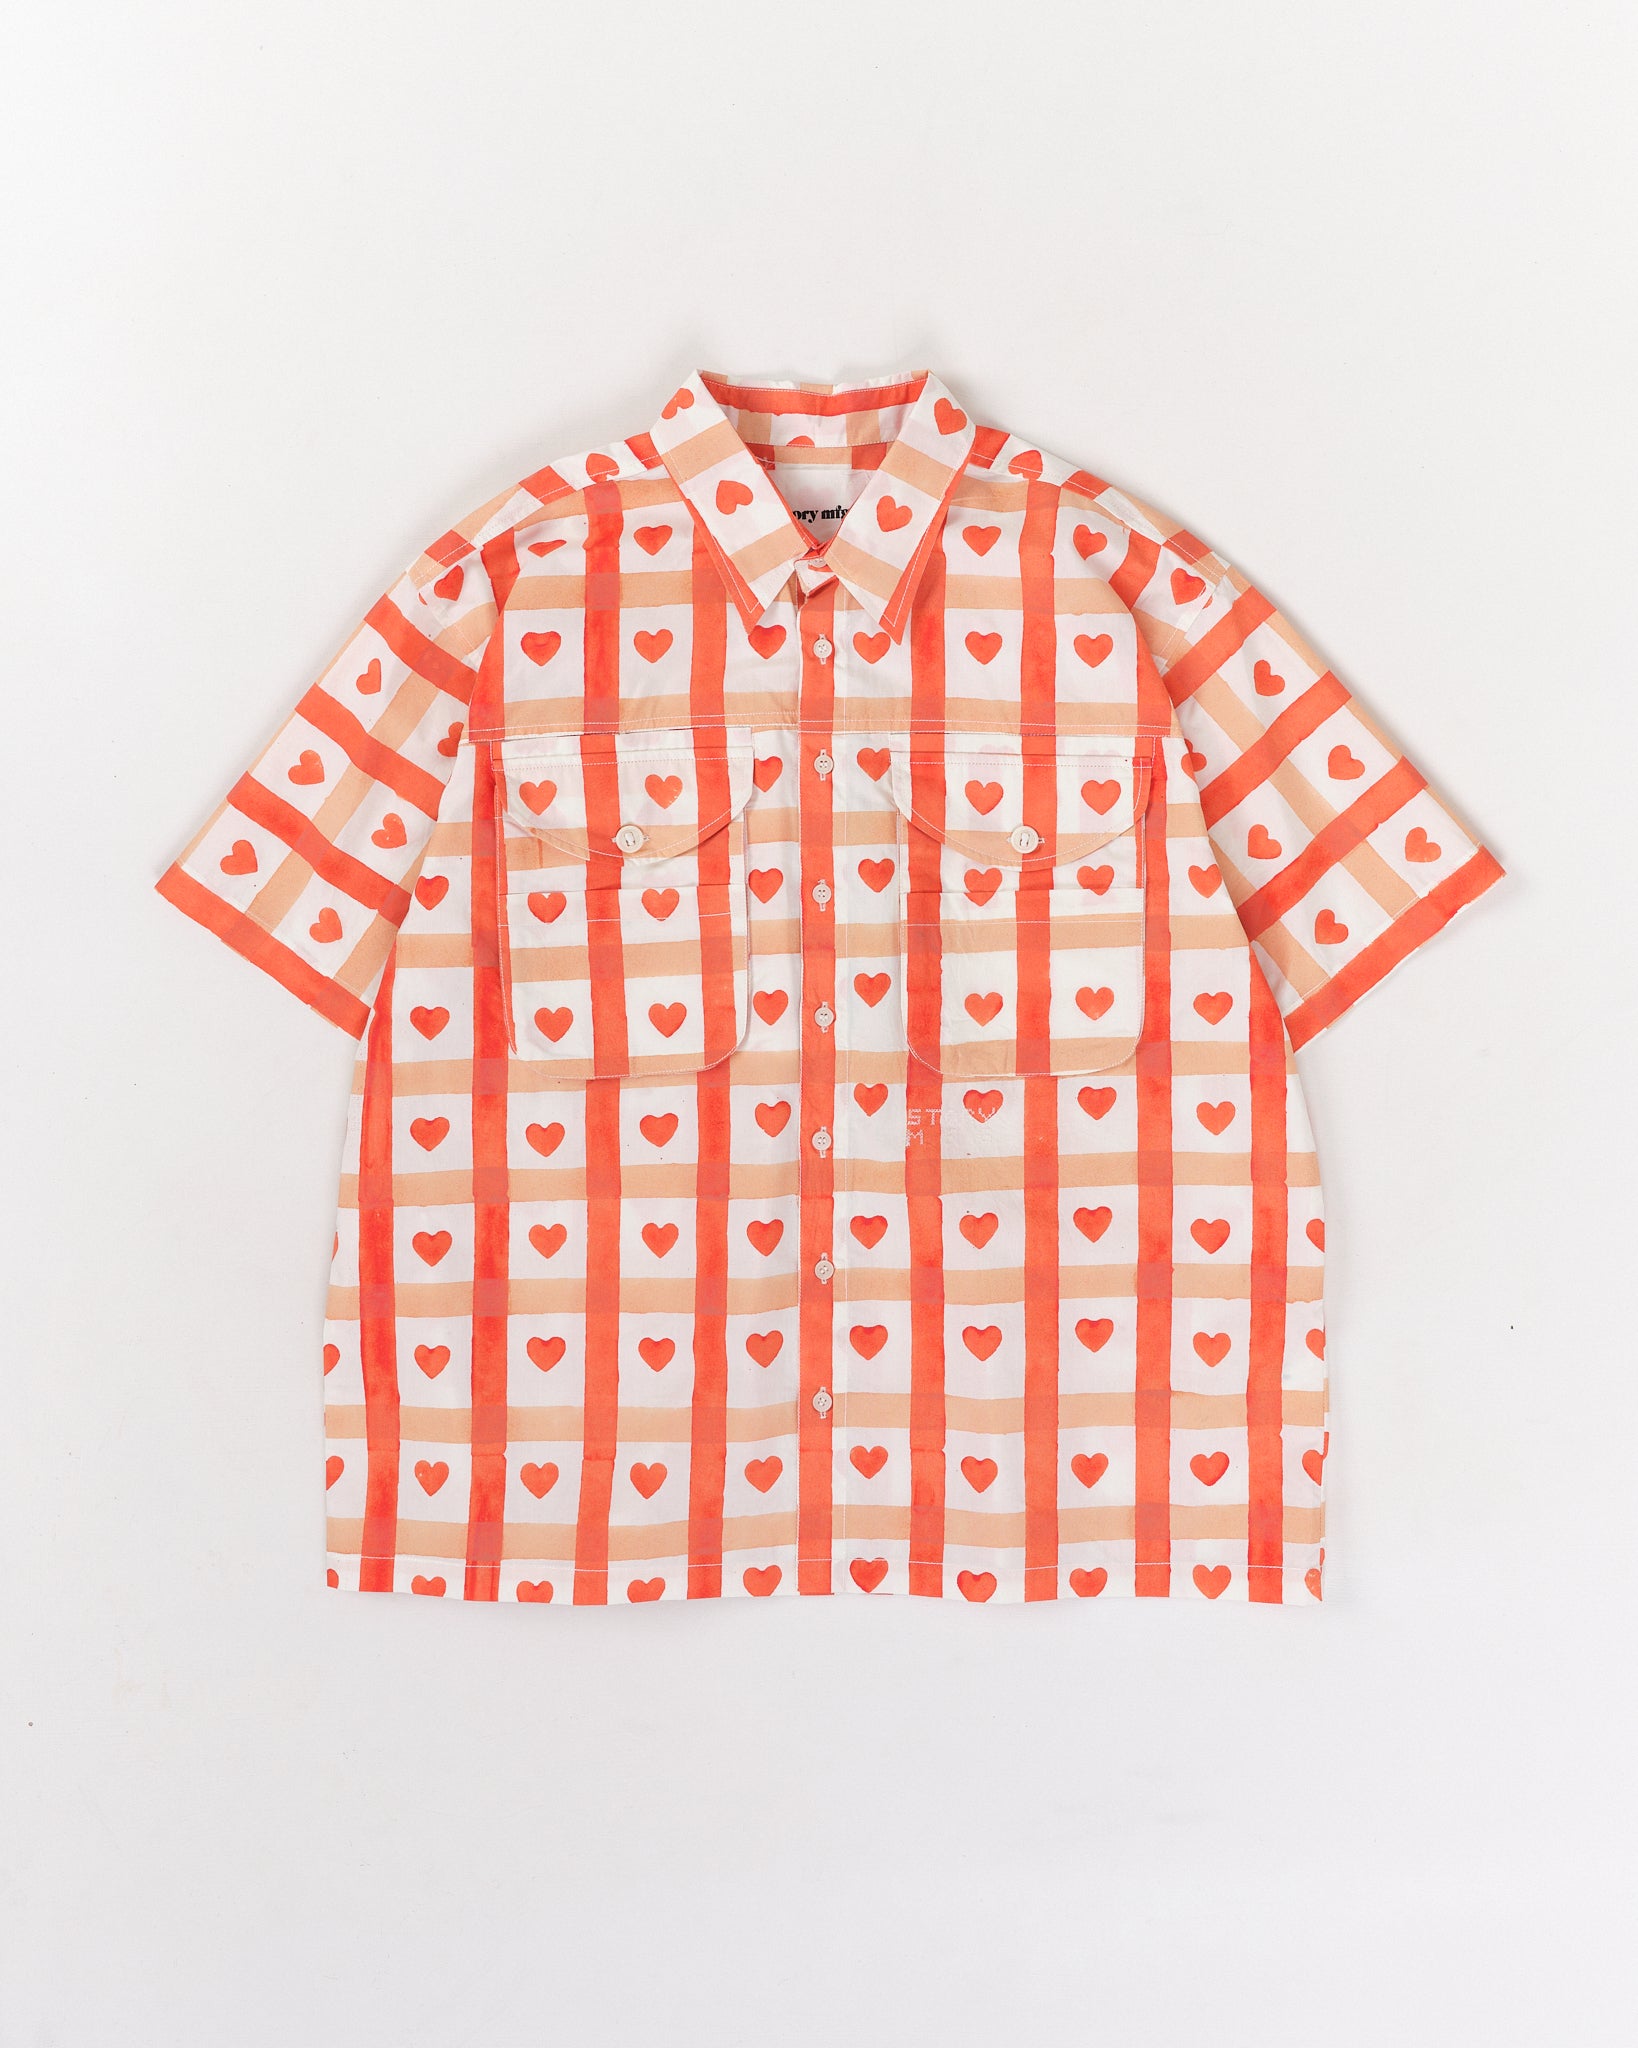 Conch Shirt - Red Heart